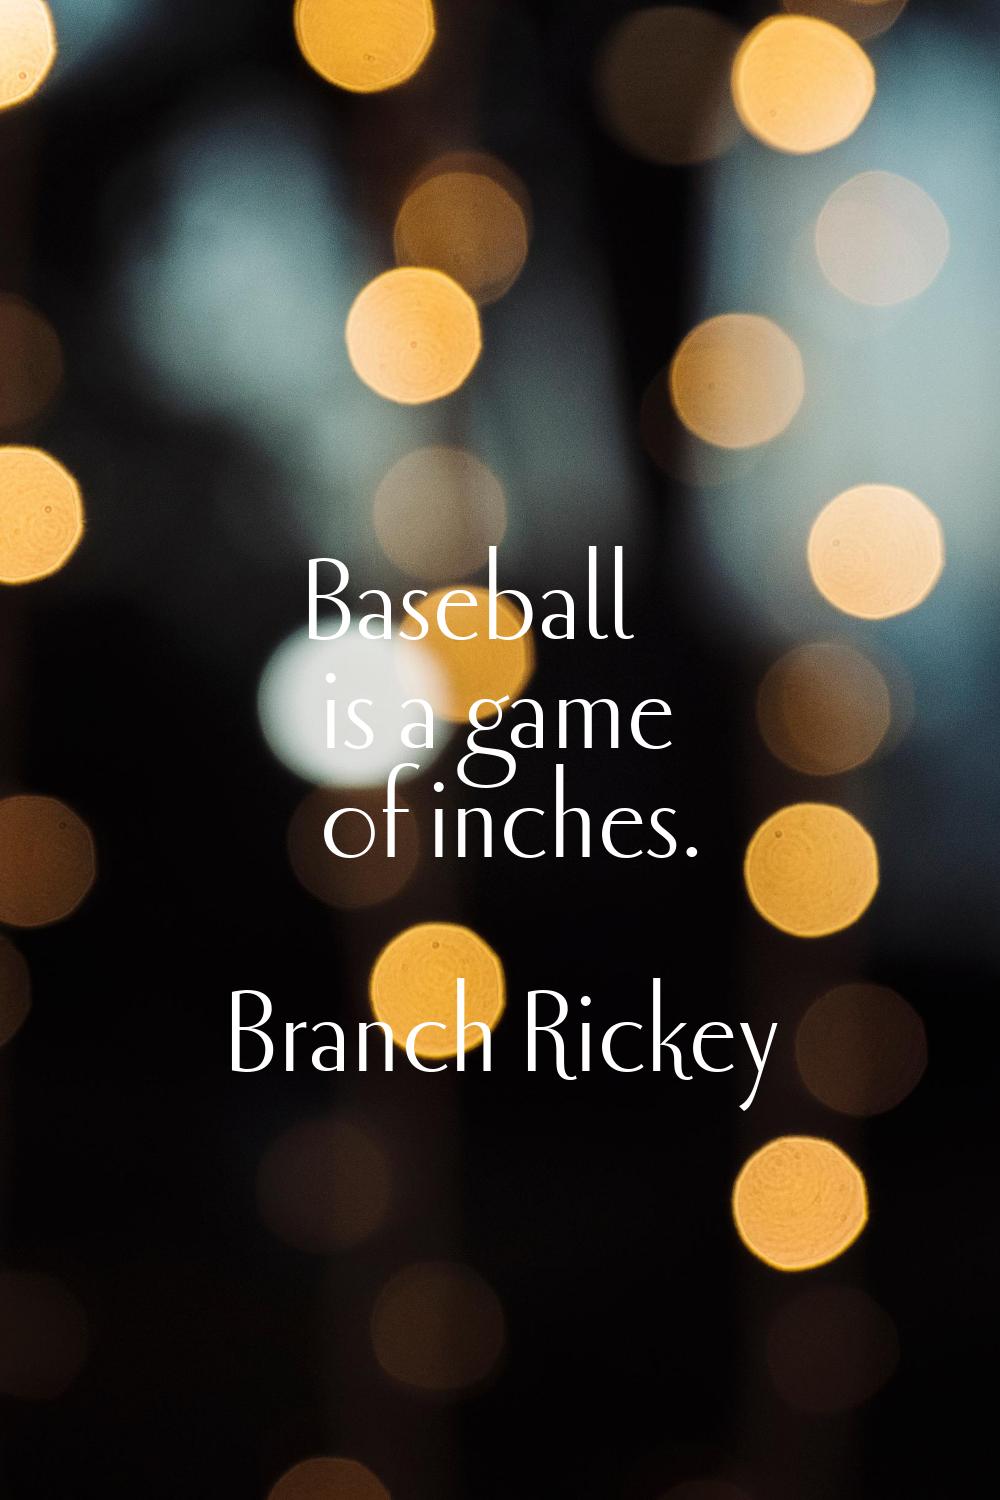 Baseball is a game of inches.